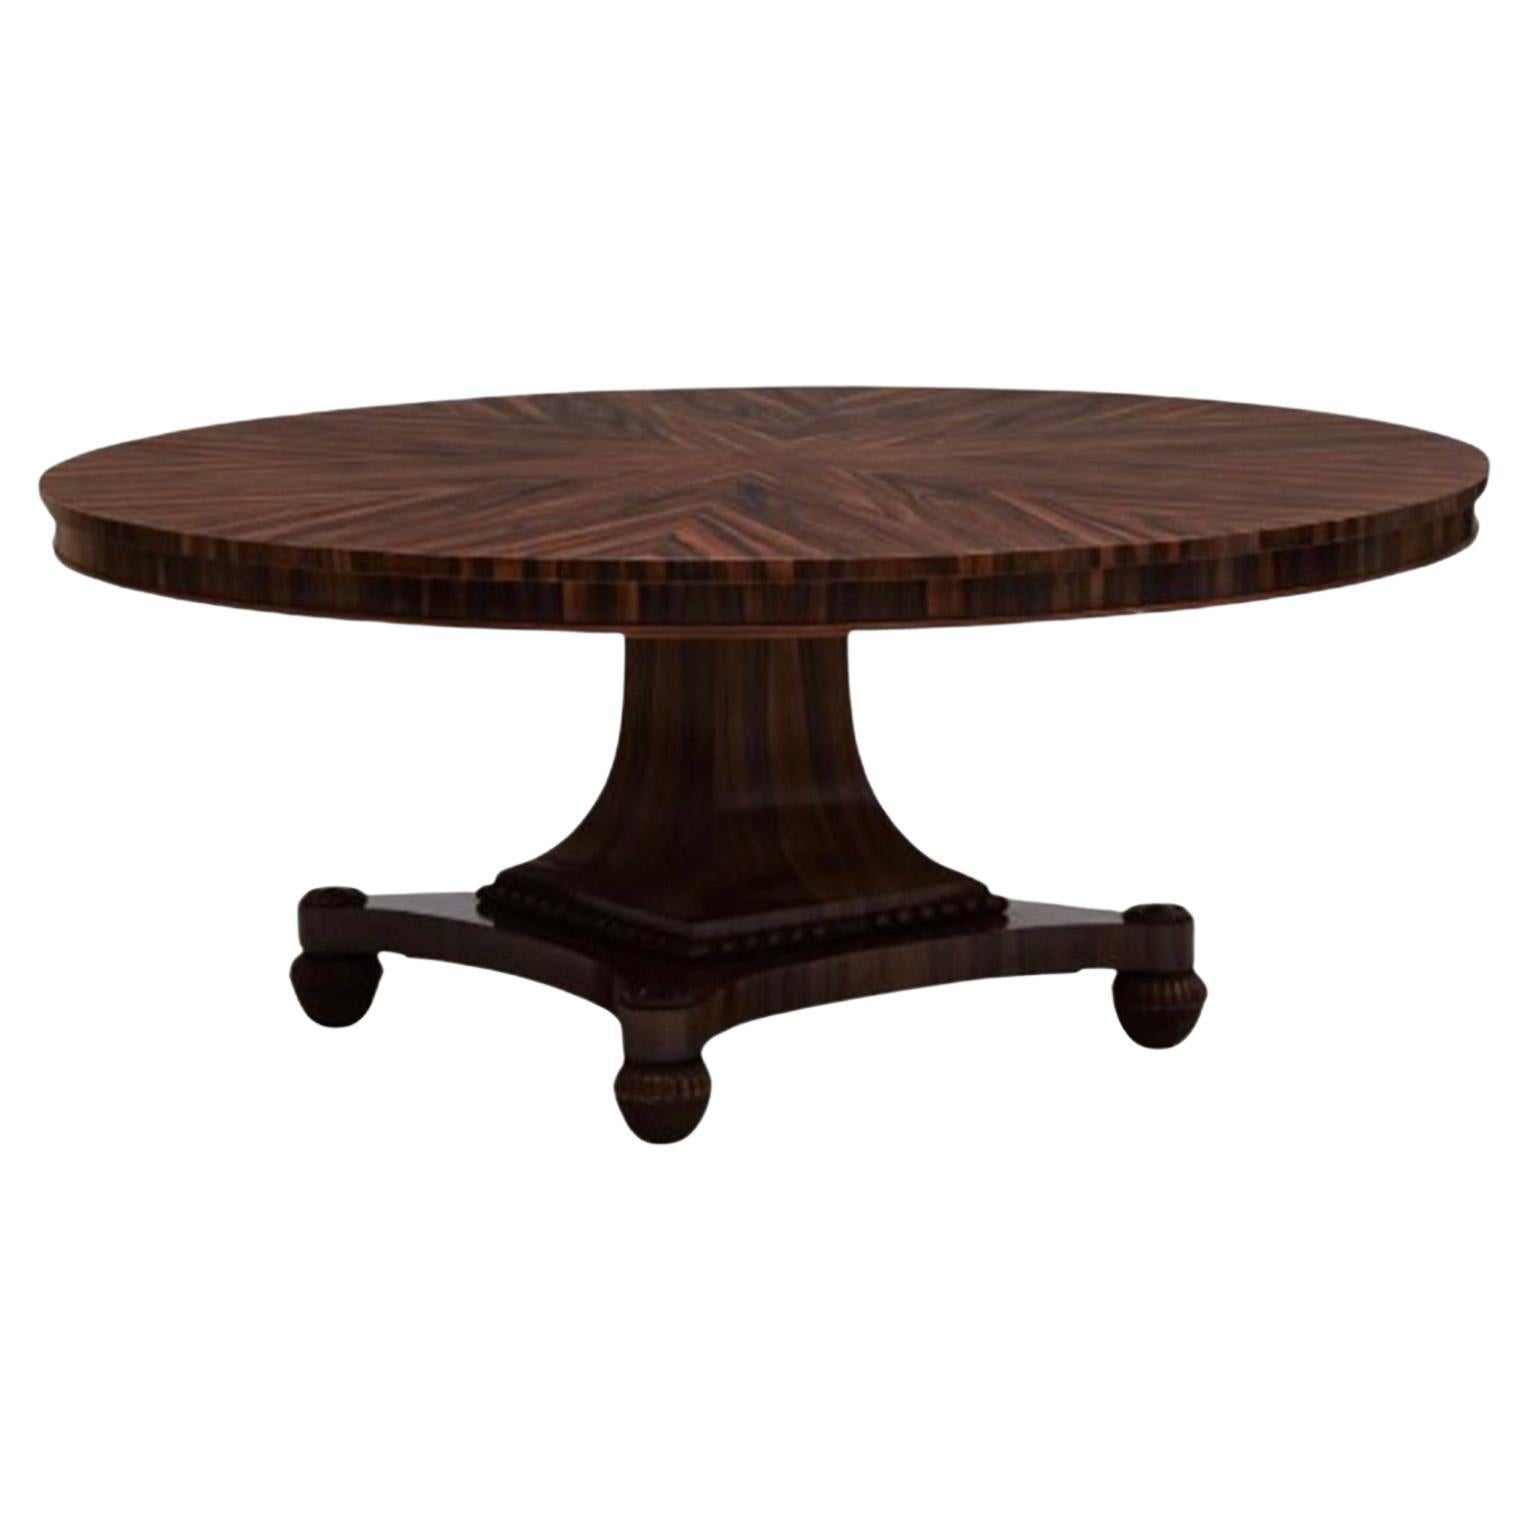 Ann Getty Collection Regency Style Zebrawood Circular Dining Table, Modern 